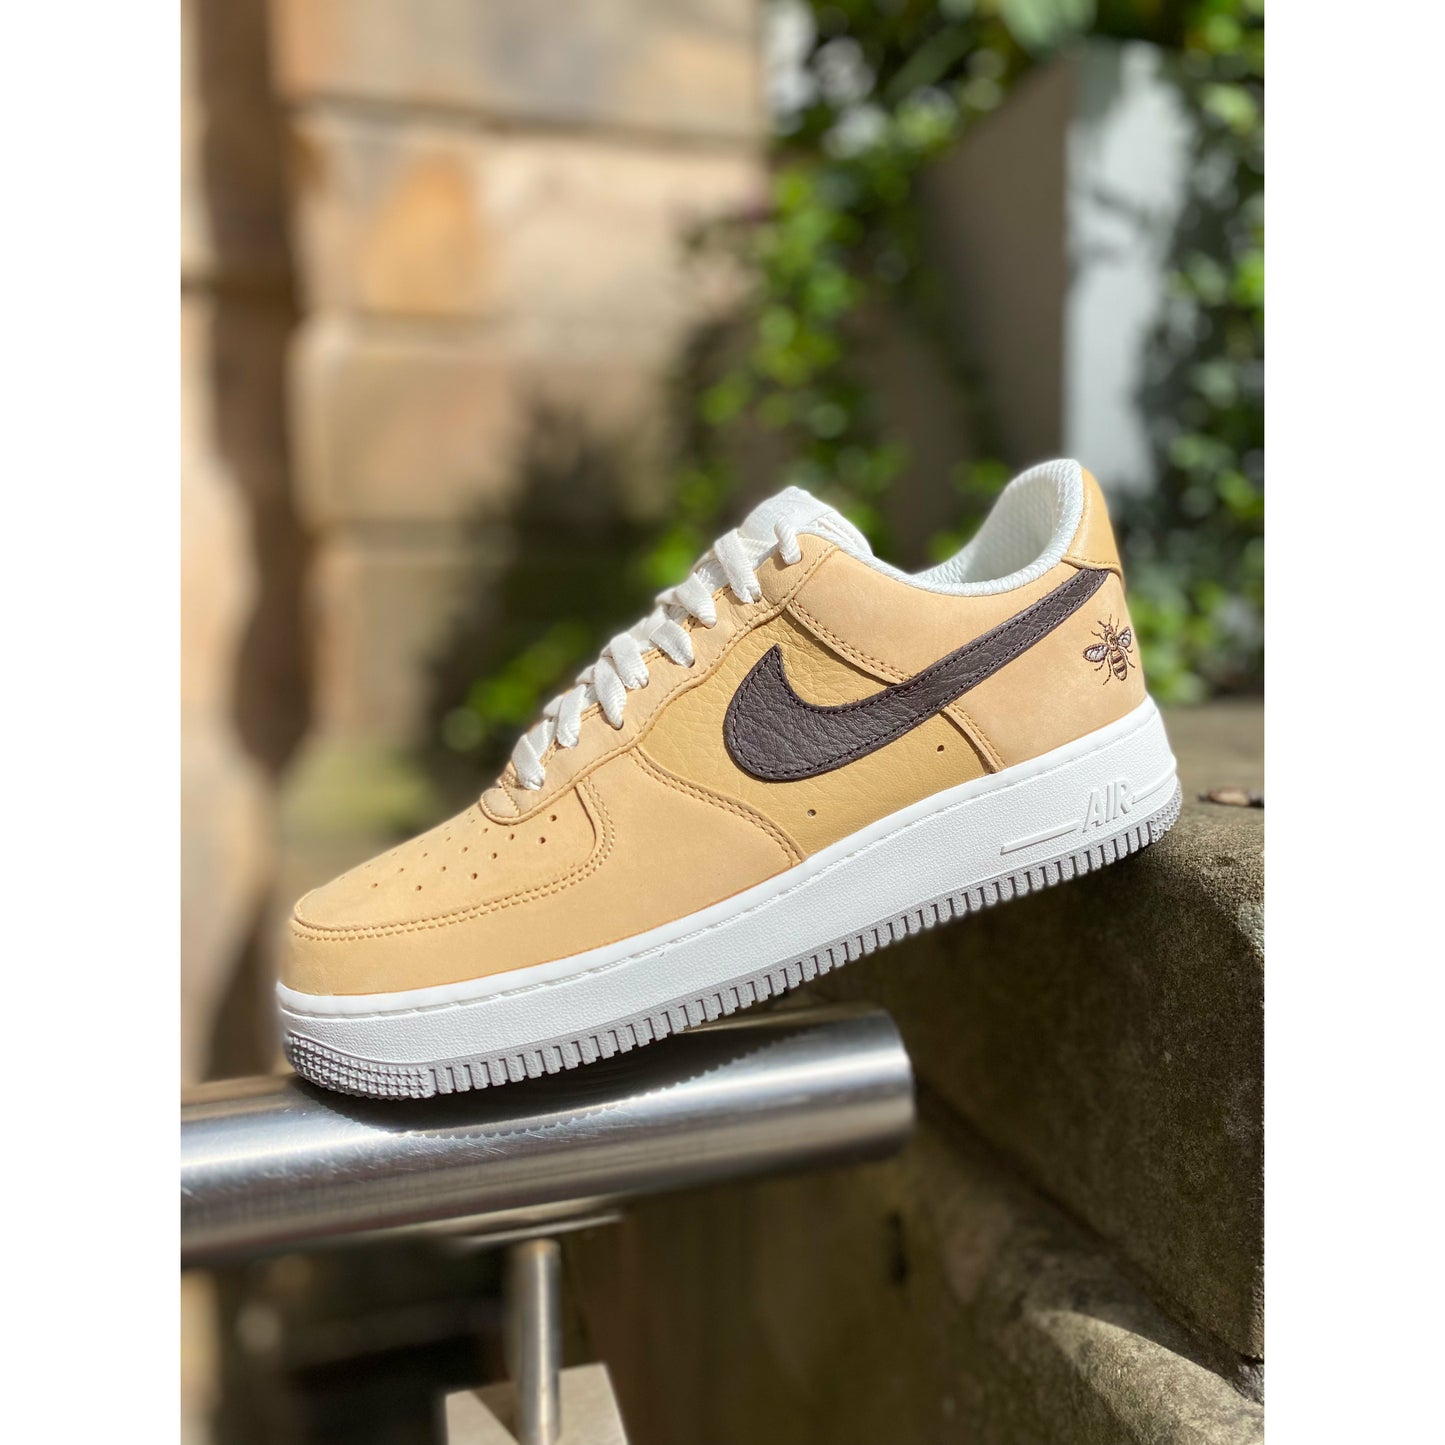 Nike Air Force 1 Low Manchester Bee by Nike from £213.00